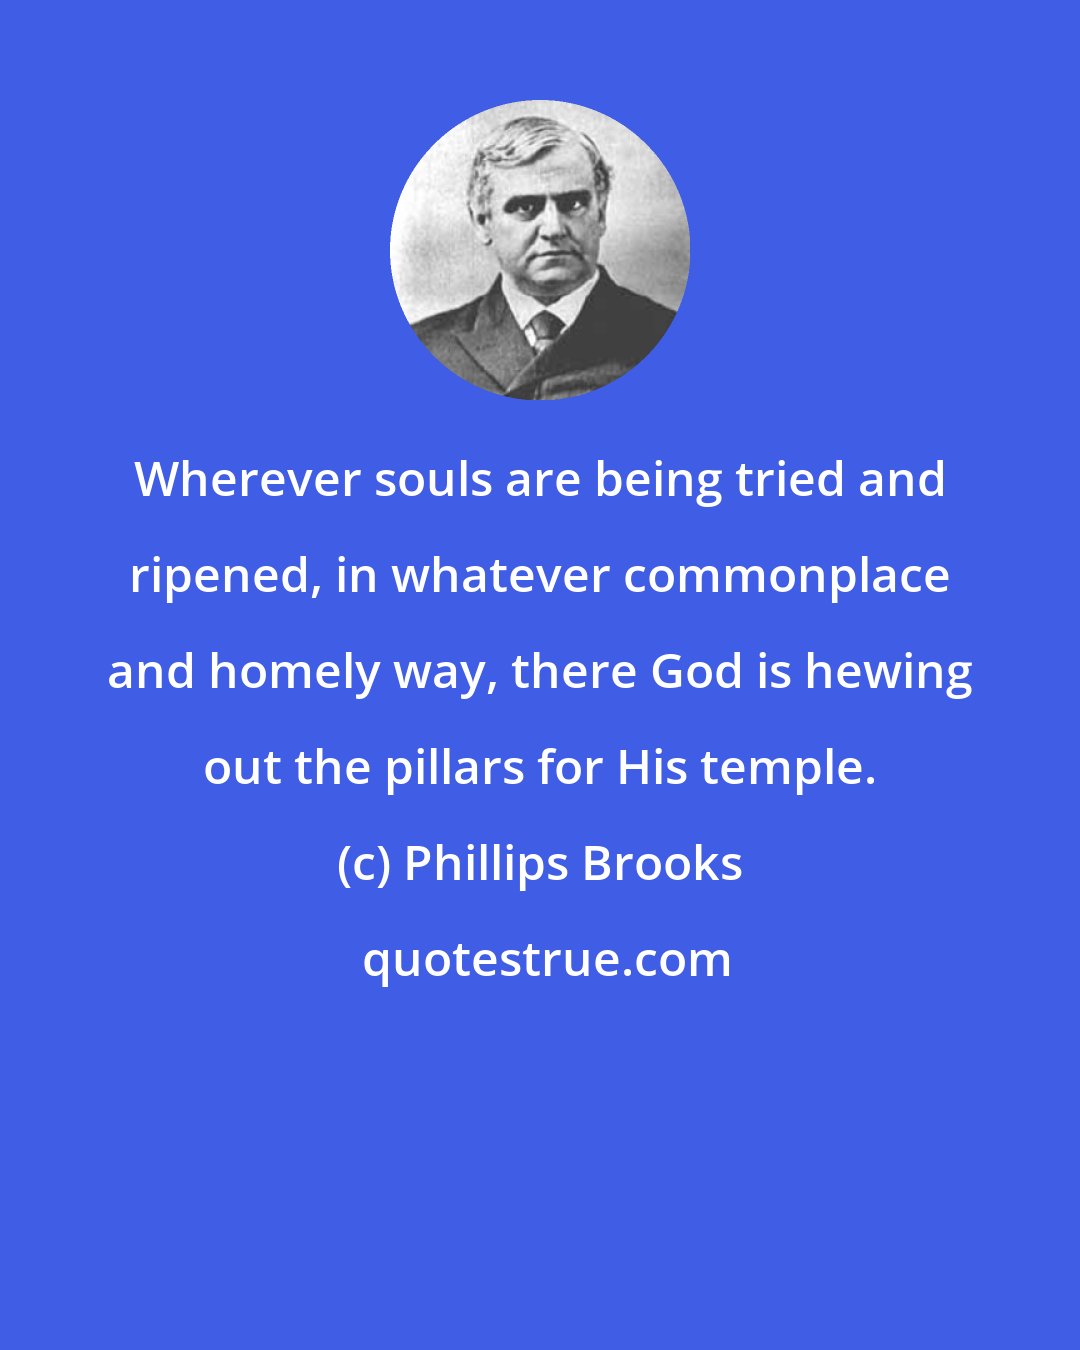 Phillips Brooks: Wherever souls are being tried and ripened, in whatever commonplace and homely way, there God is hewing out the pillars for His temple.